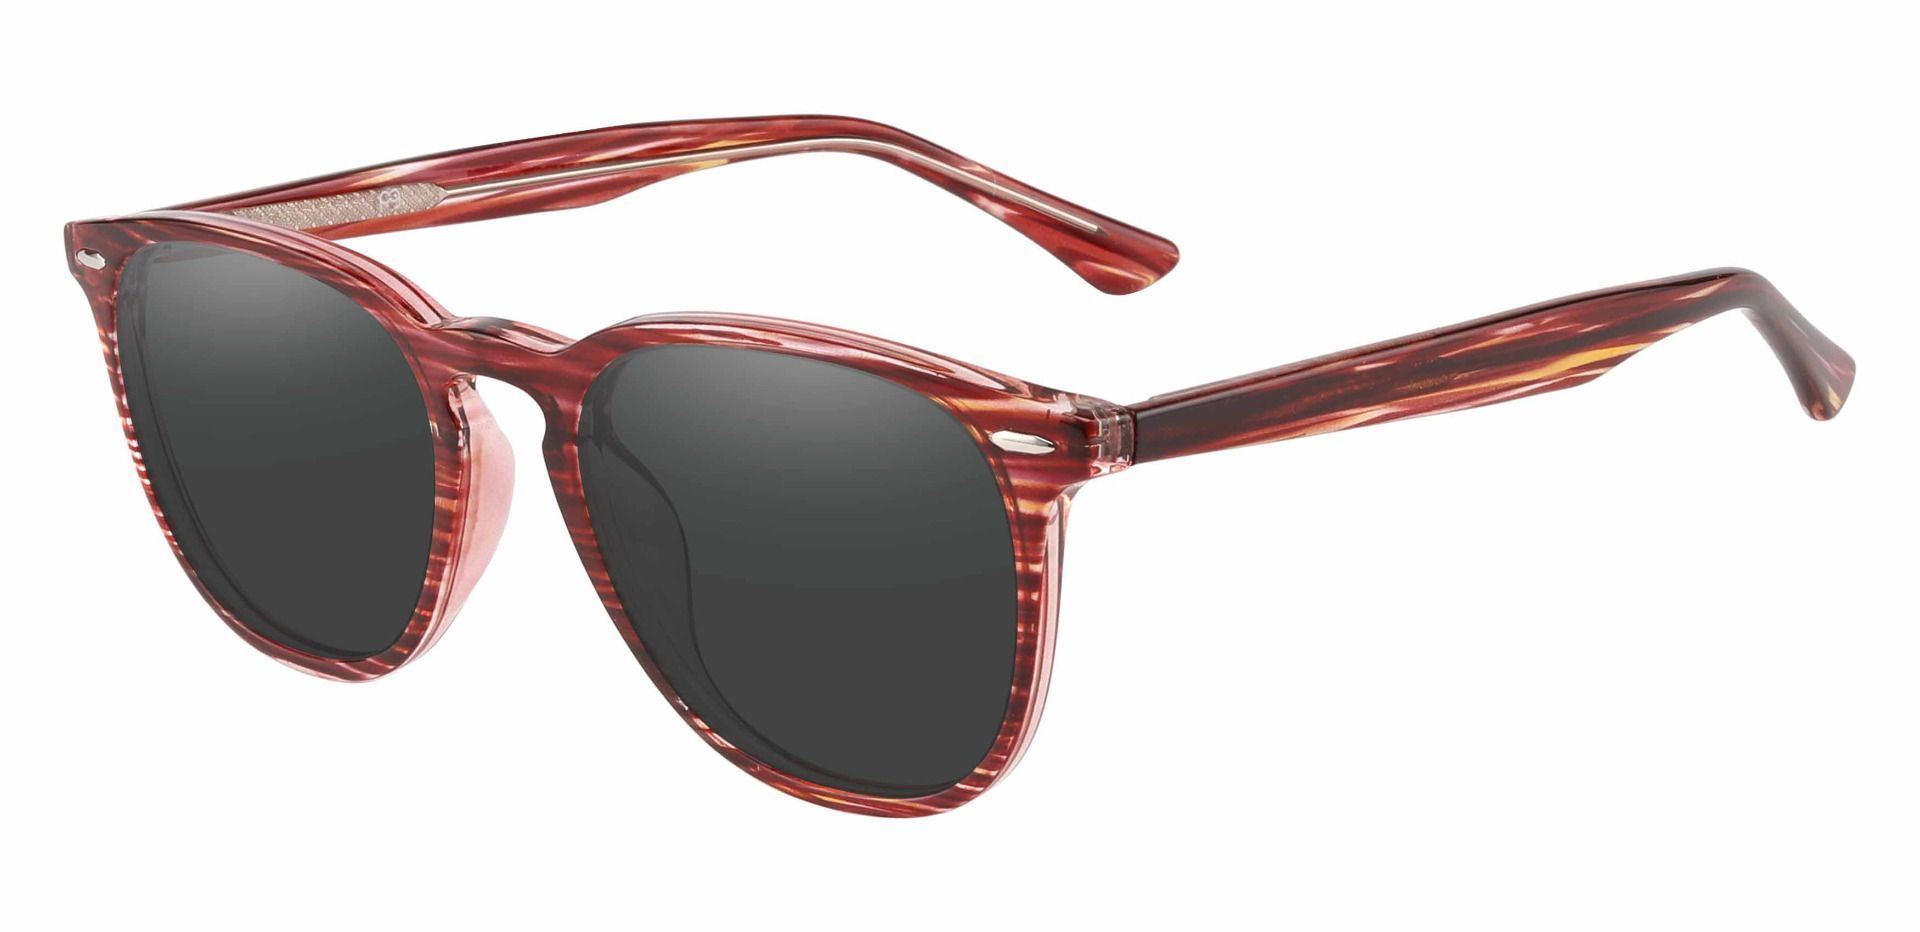 Sycamore Oval Non-Rx Sunglasses - Red Frame With Gray Lenses